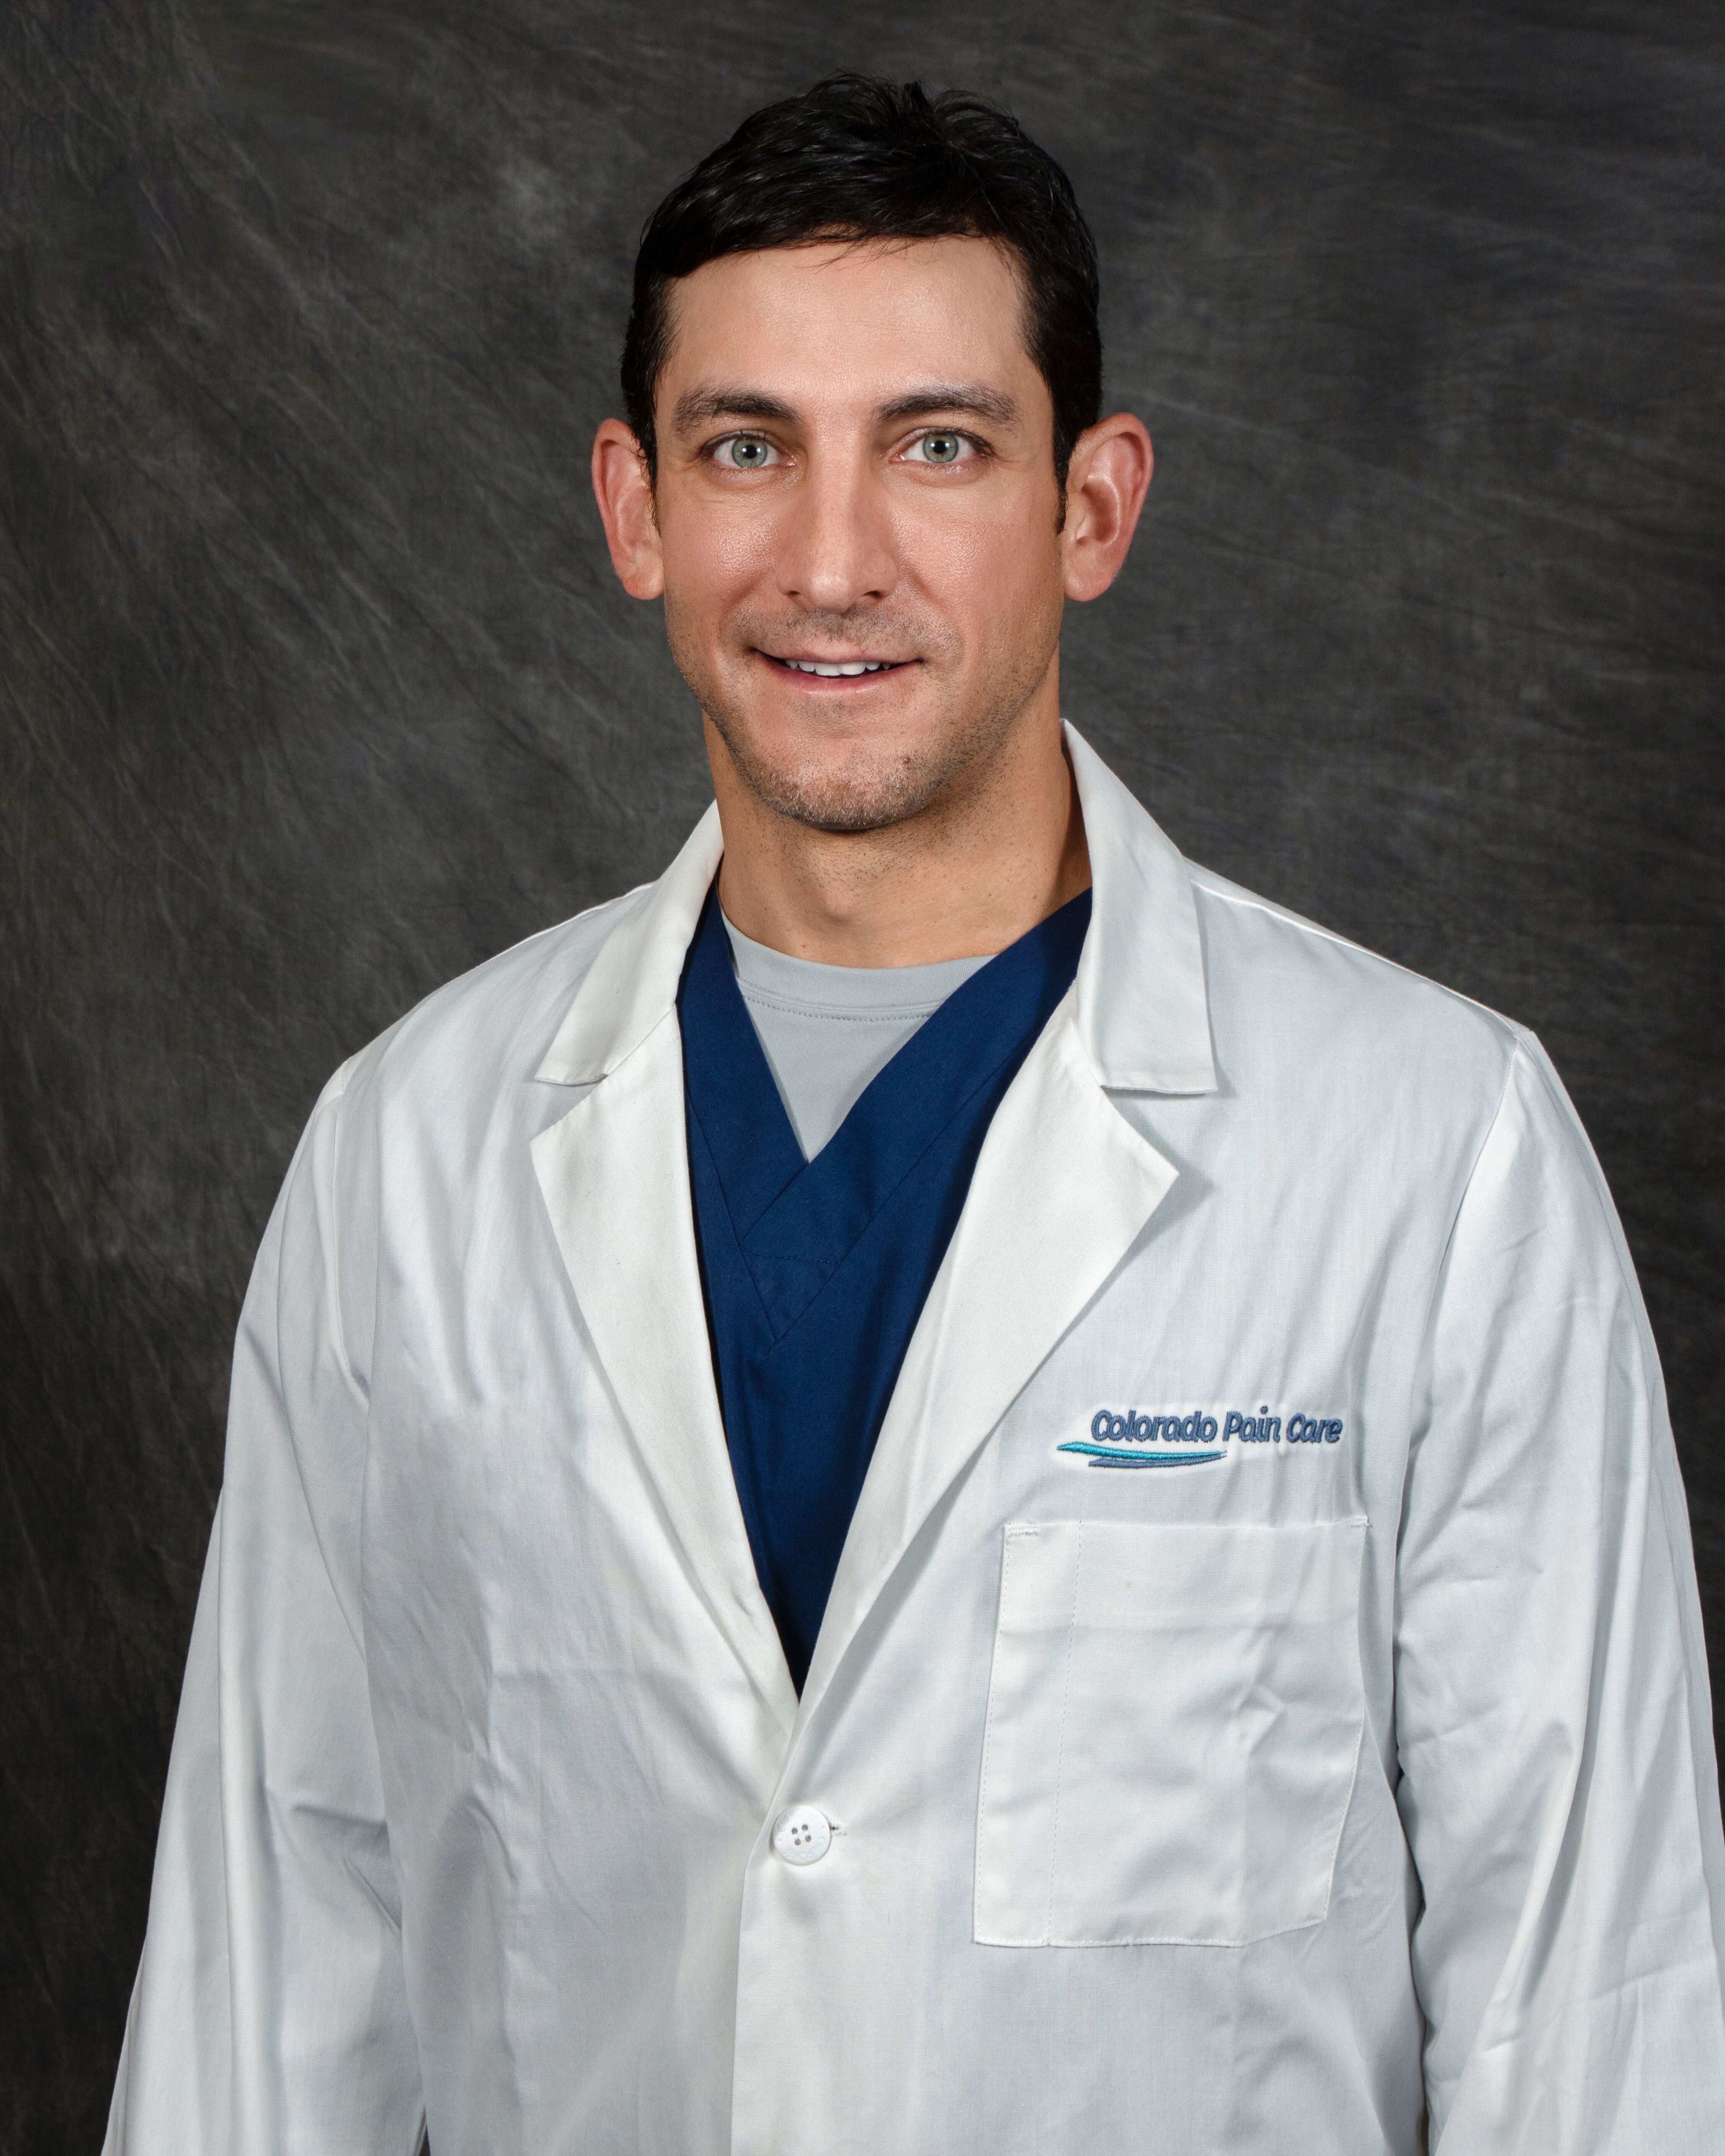 Dr. Moghim Participates in Clinical Trial for Knee Pain